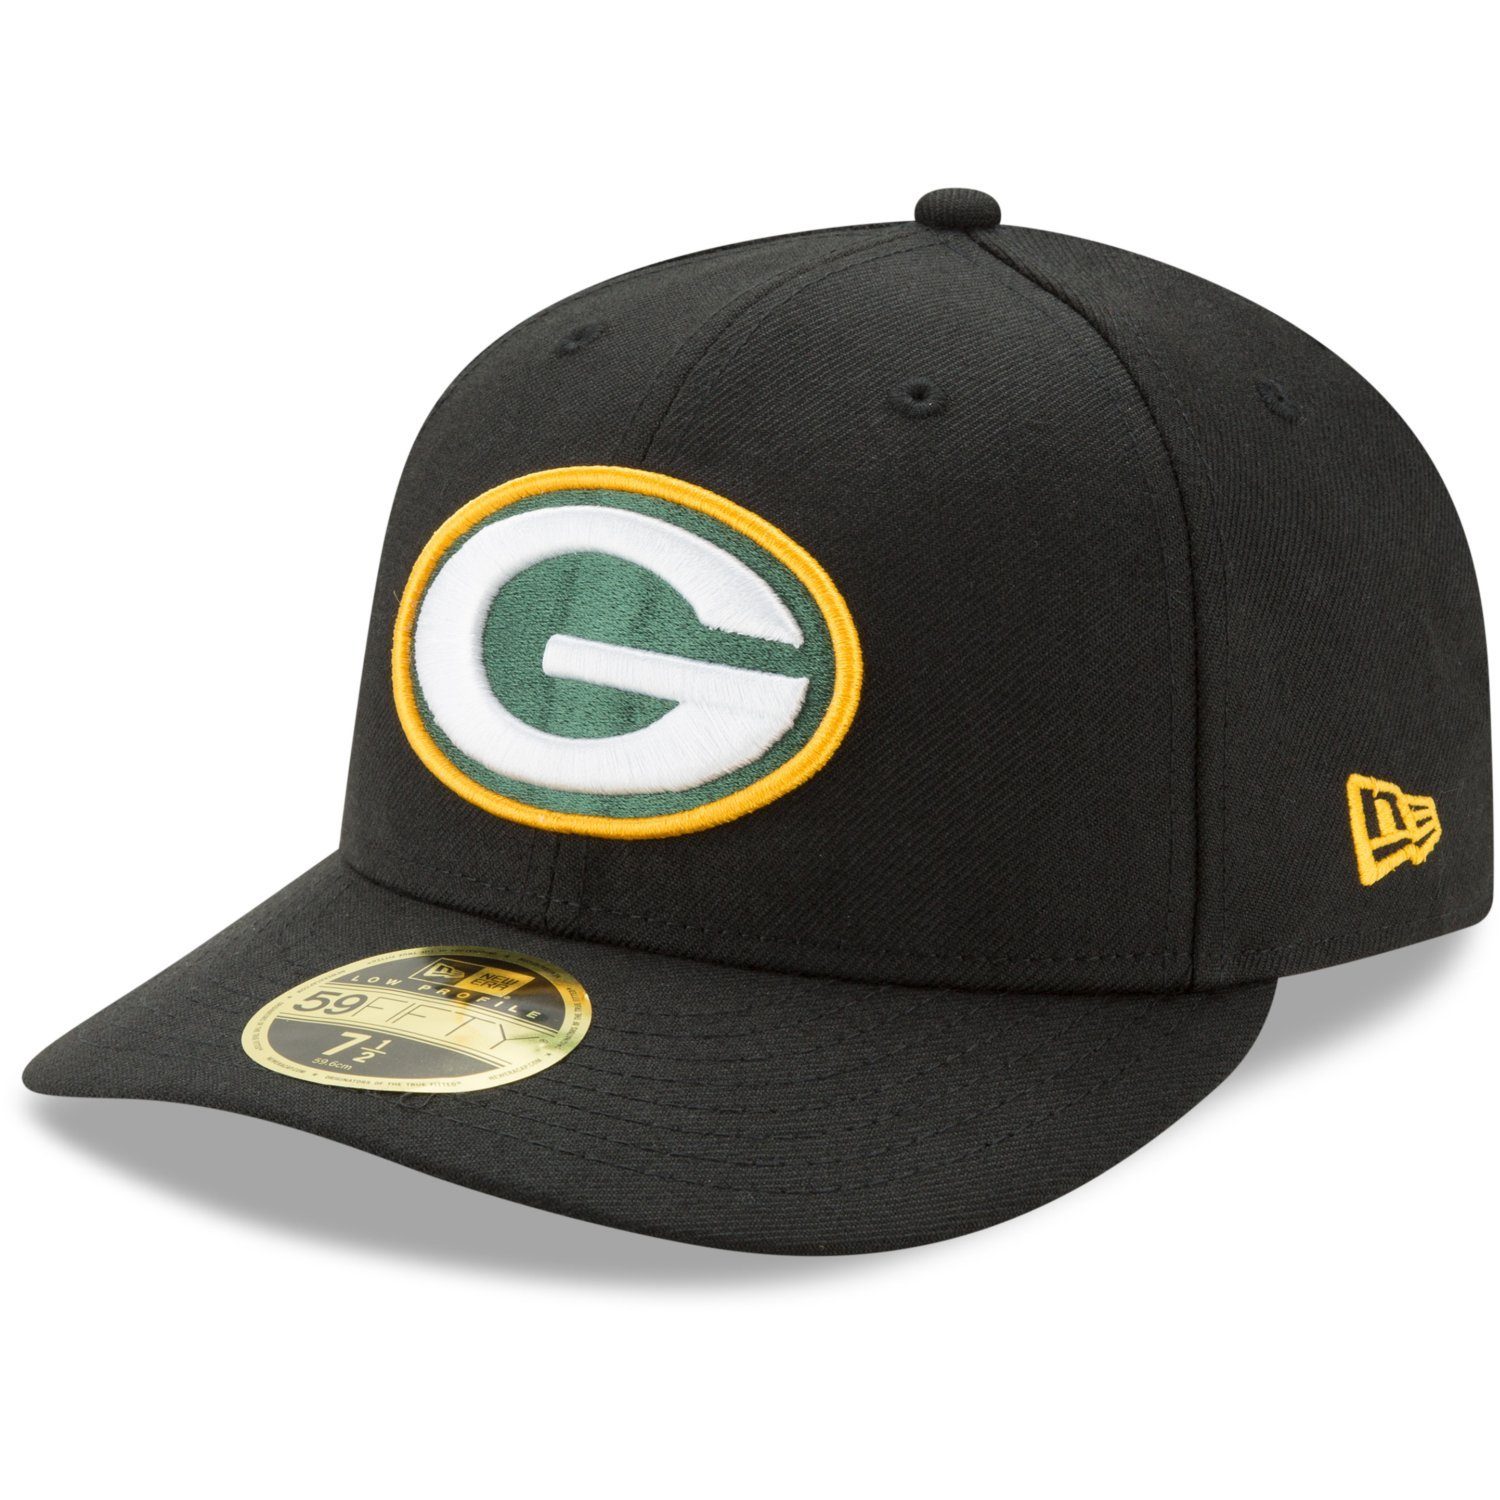 New Era Fitted Cap 59Fifty LOW PROFILE Green Bay Packers